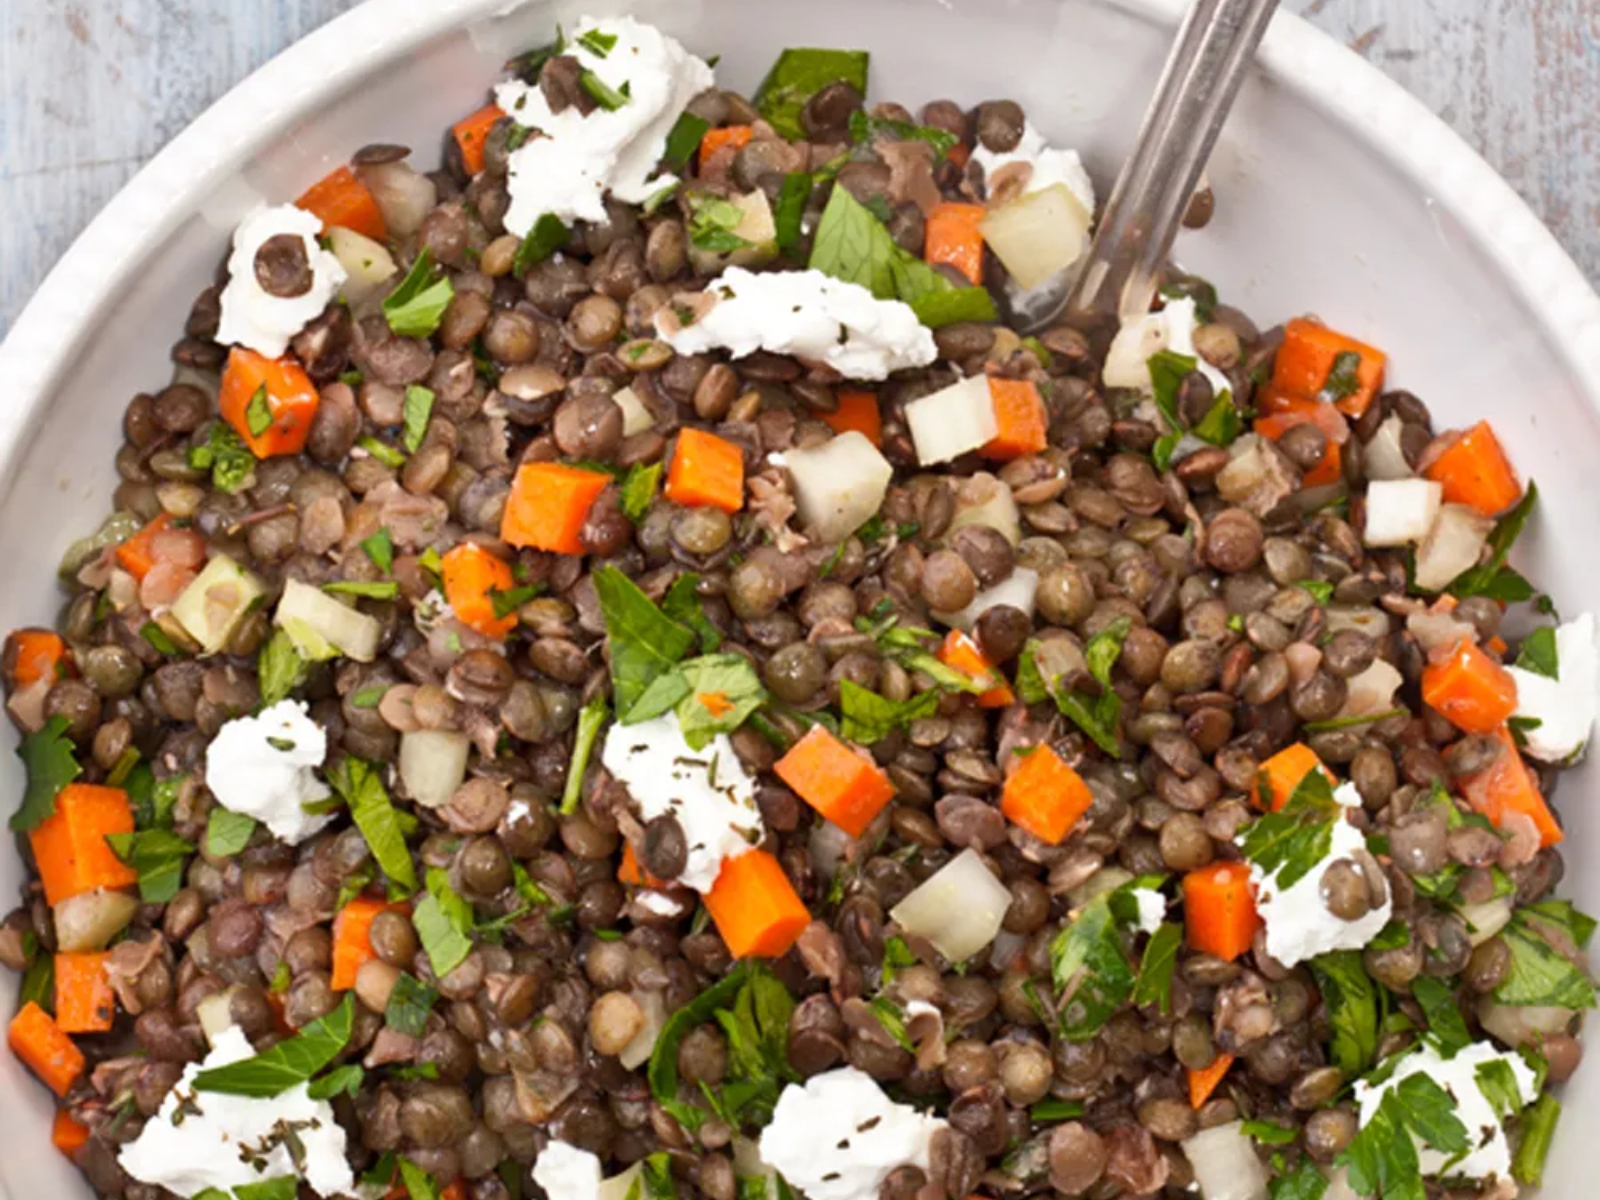 French Lentil Salad with Goat Cheese